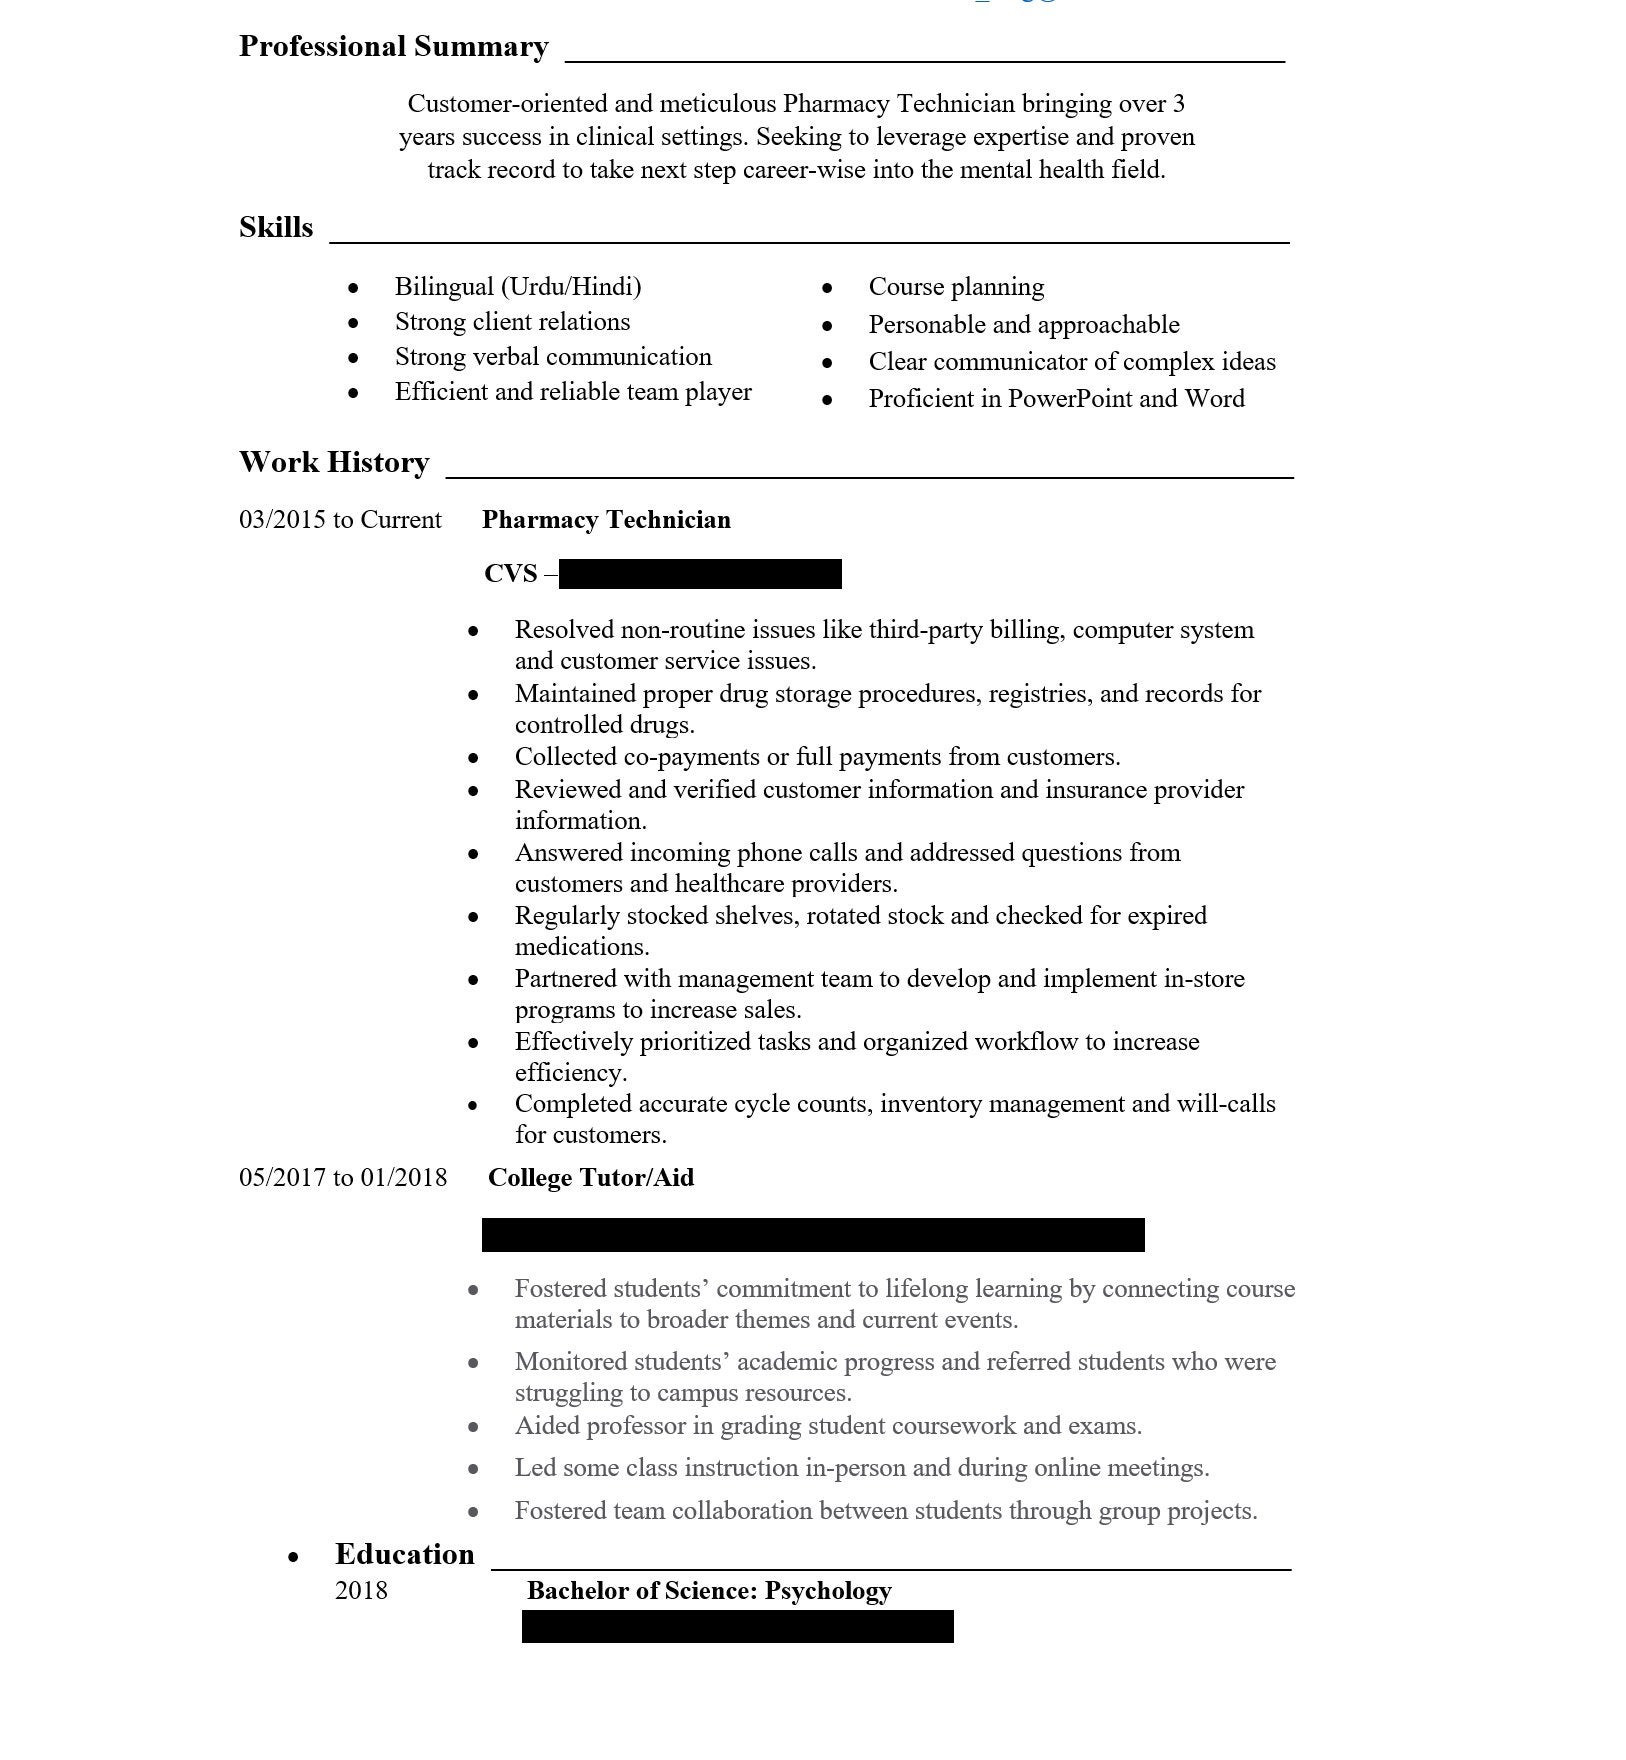 Indeed Sample Resume Physical therapist Reddit Cover Letter Feedback (indeed.com) Thank You for Your Help …